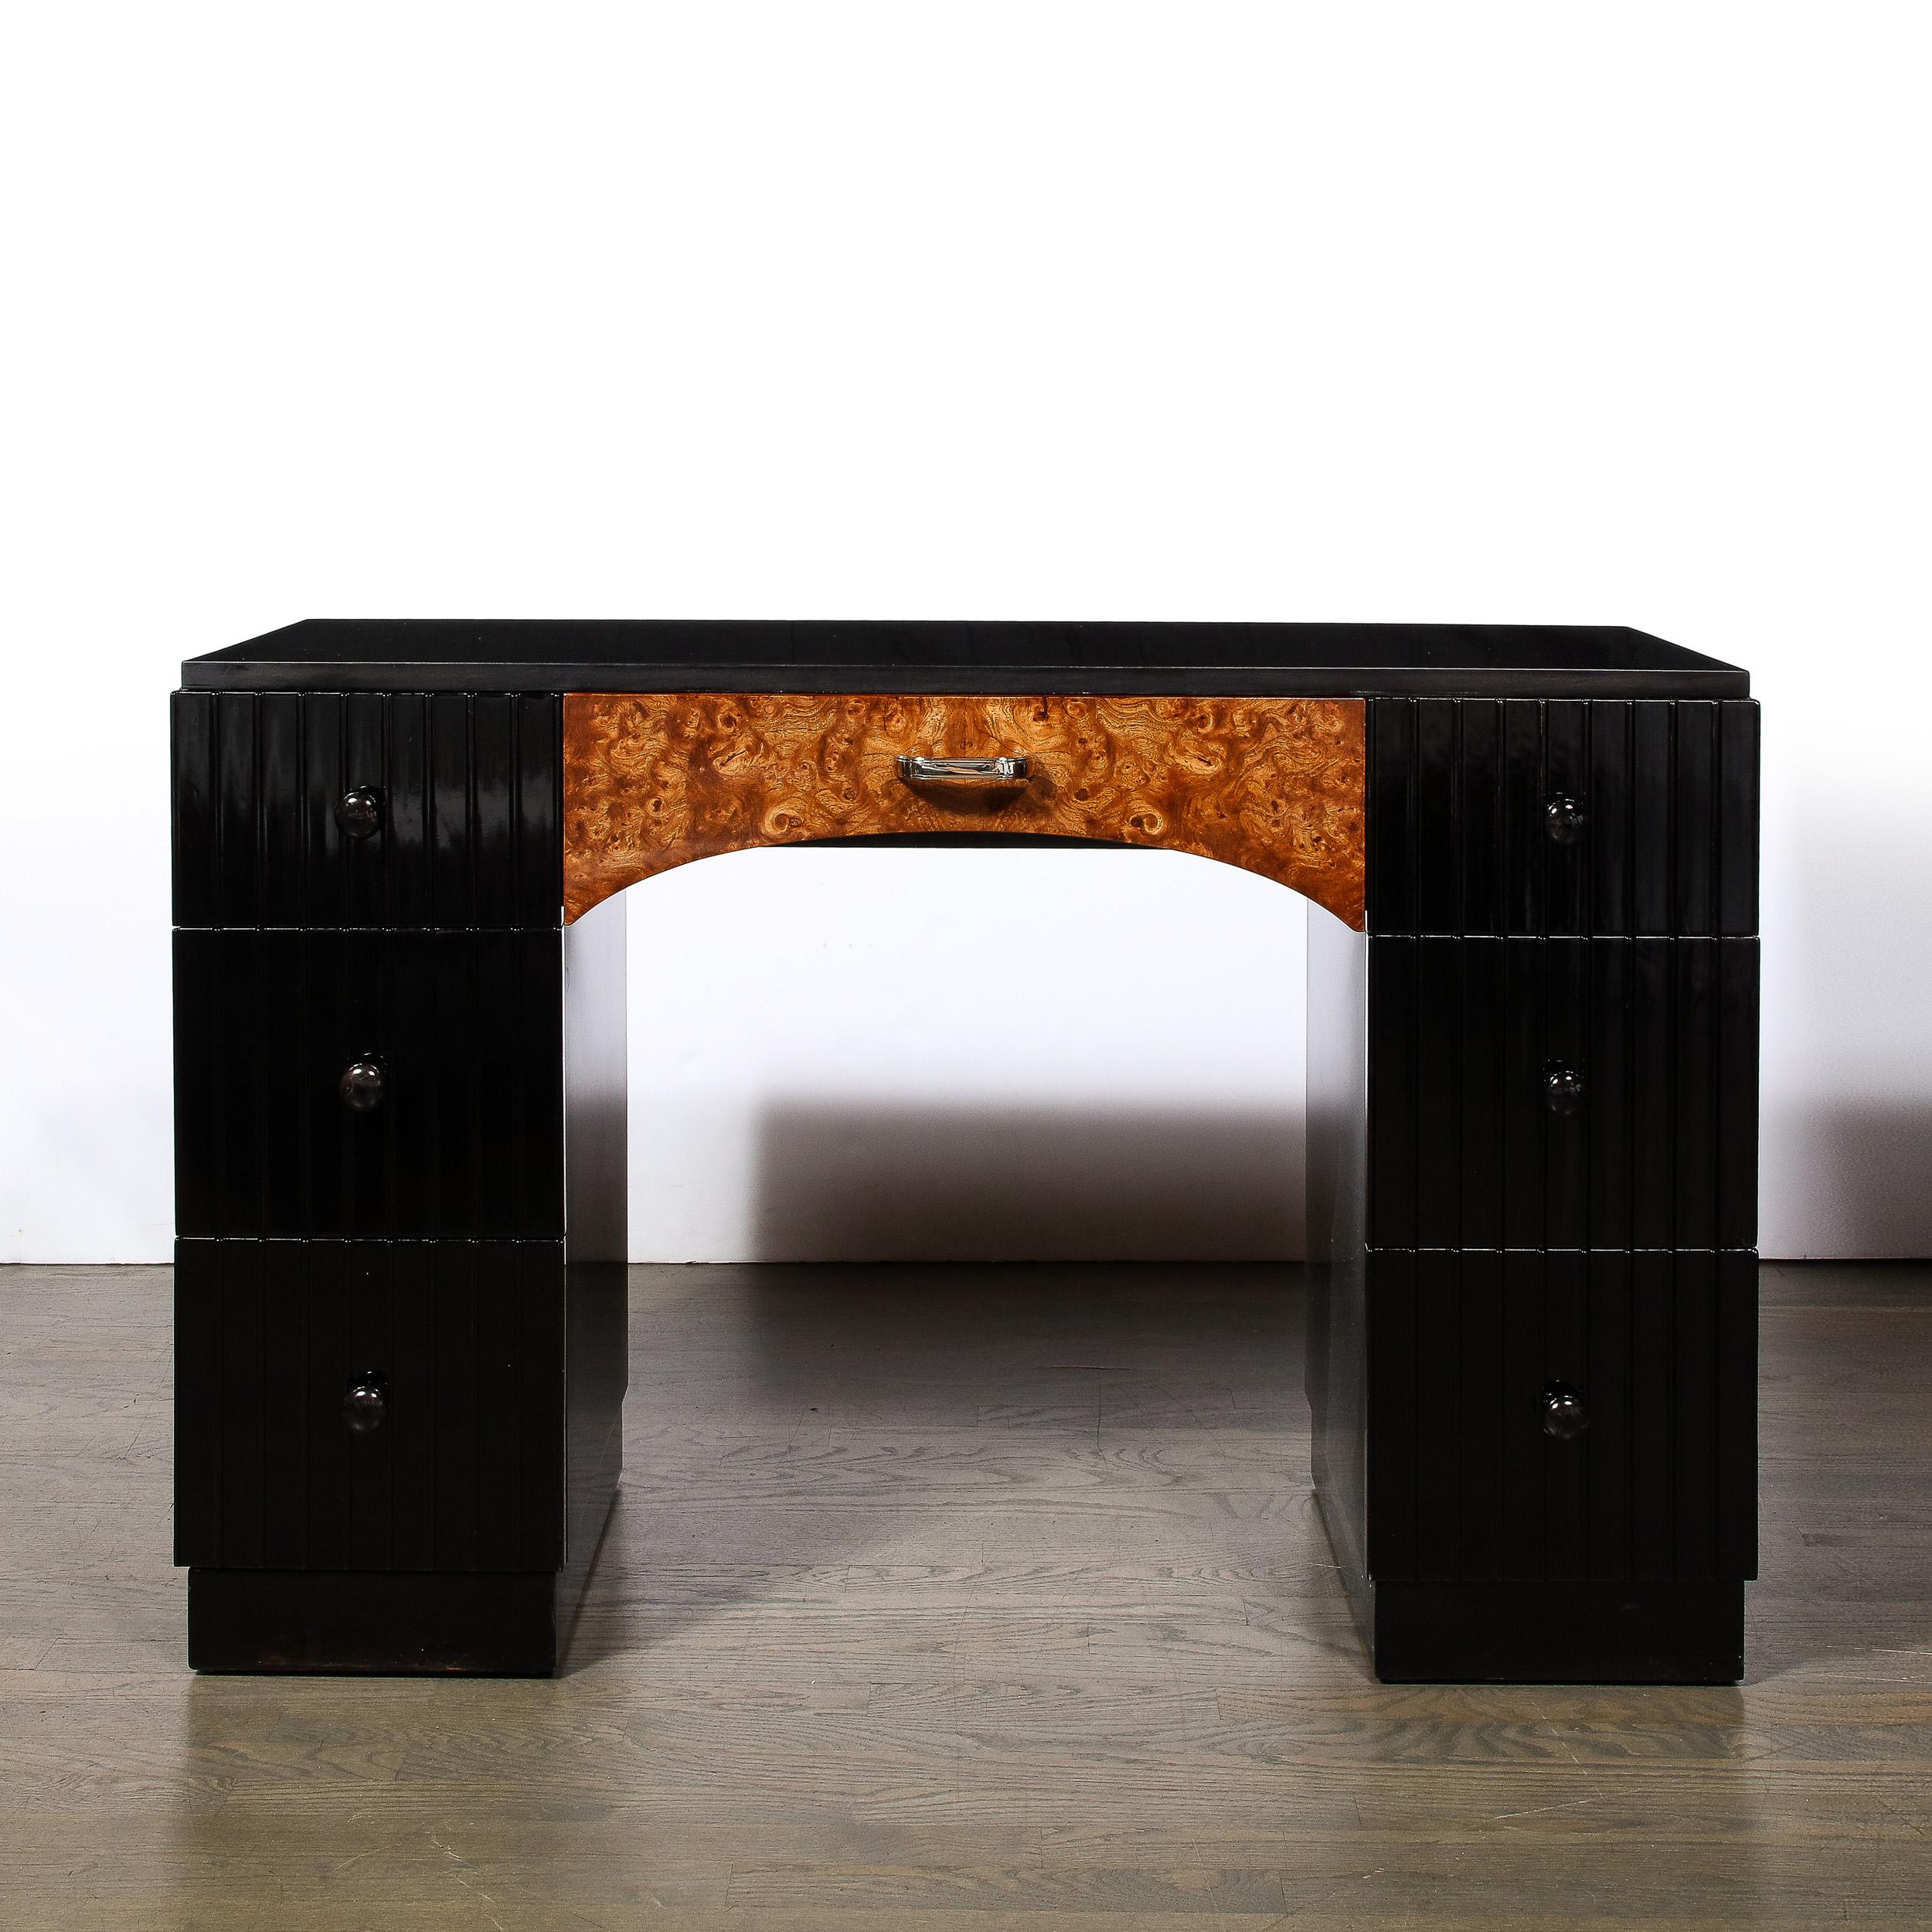 -This Art Deco Vanity / Desk Originates in the United States Circa 1935 and is a brilliant example of the Art Deco style and fabrication techniques. Made entirely of walnut and finished in black lacquer, the quality of the materials and construction